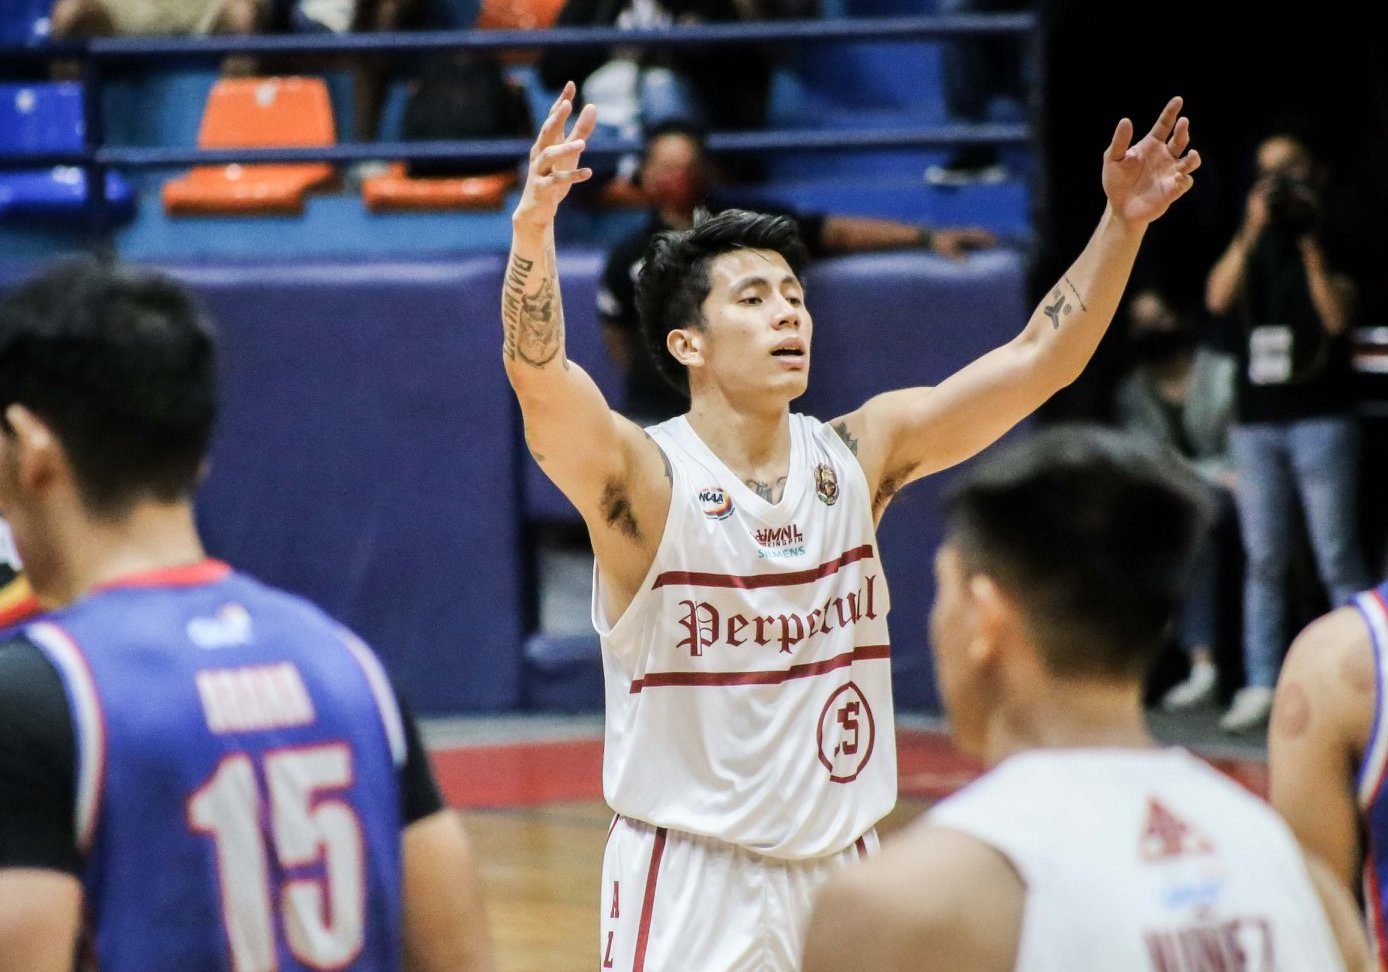 Aurin, Perpetual eliminate Arellano to stay alive in NCAA Final Four hunt